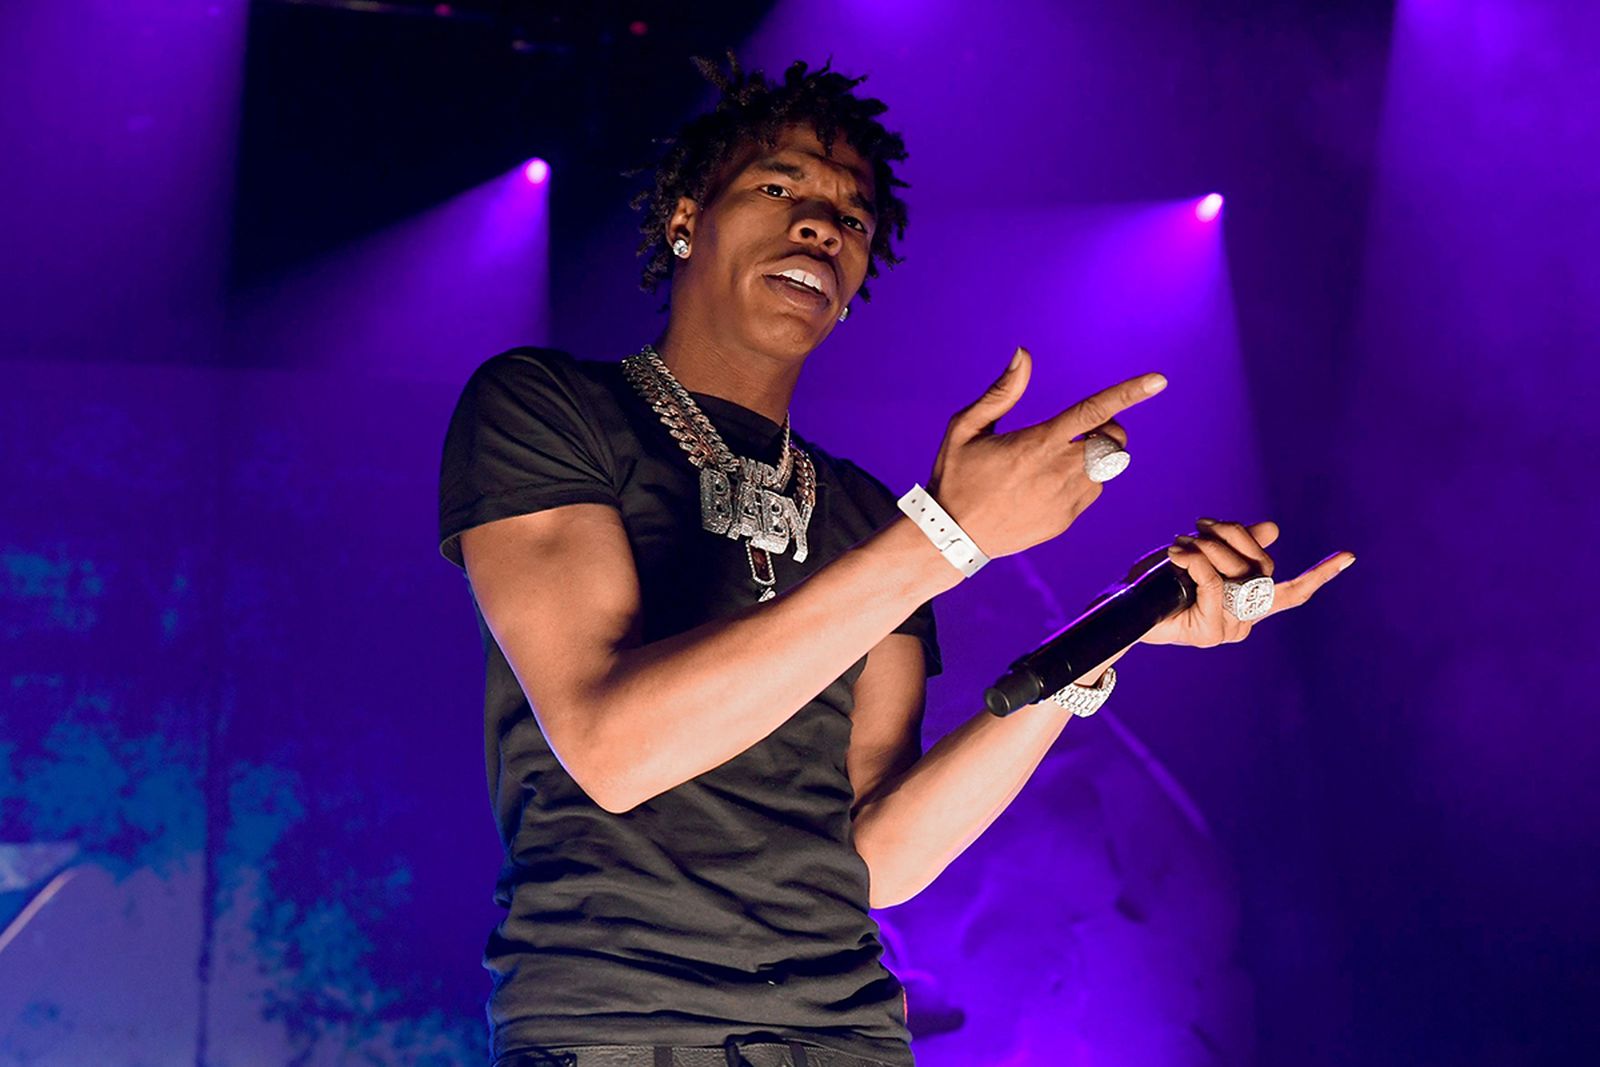 Lil Baby performing